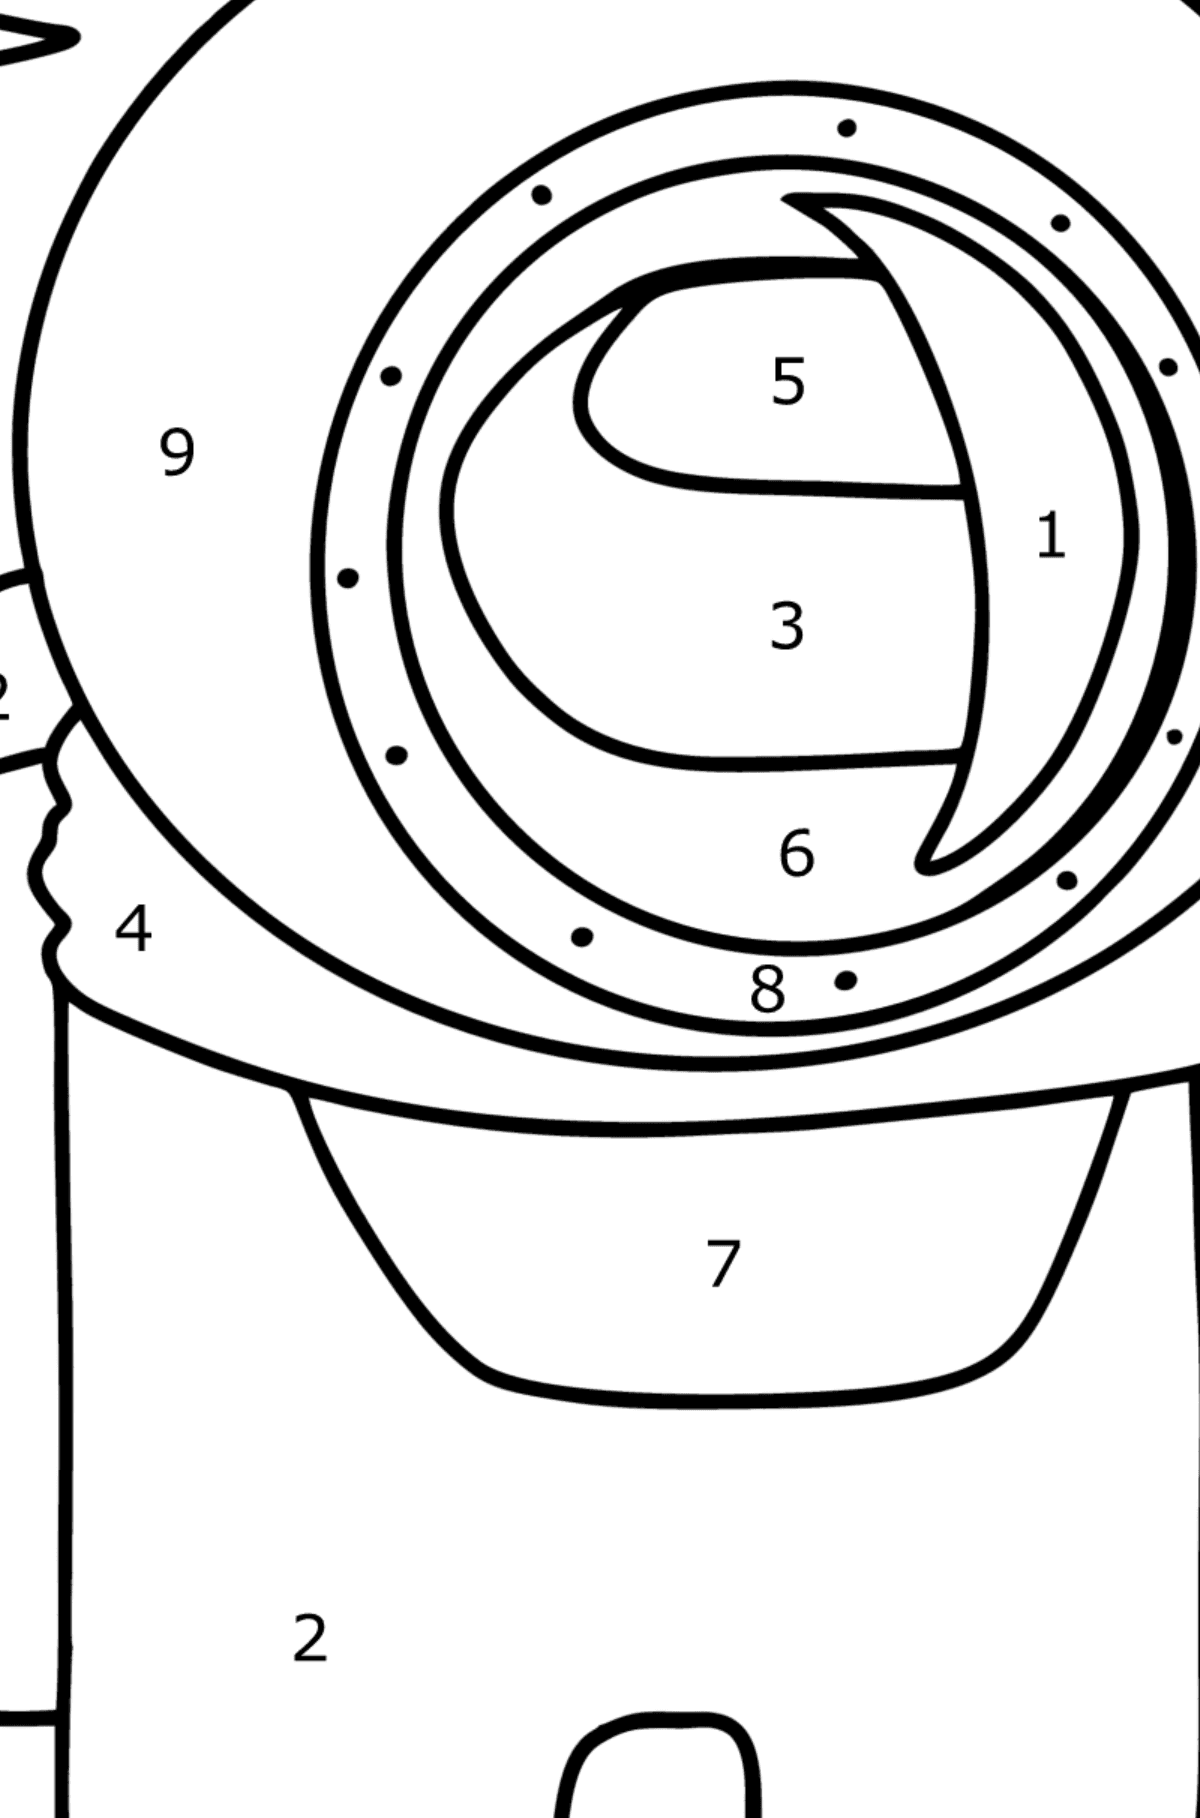 Colouring page of Among Us - Coloring by Numbers for Kids